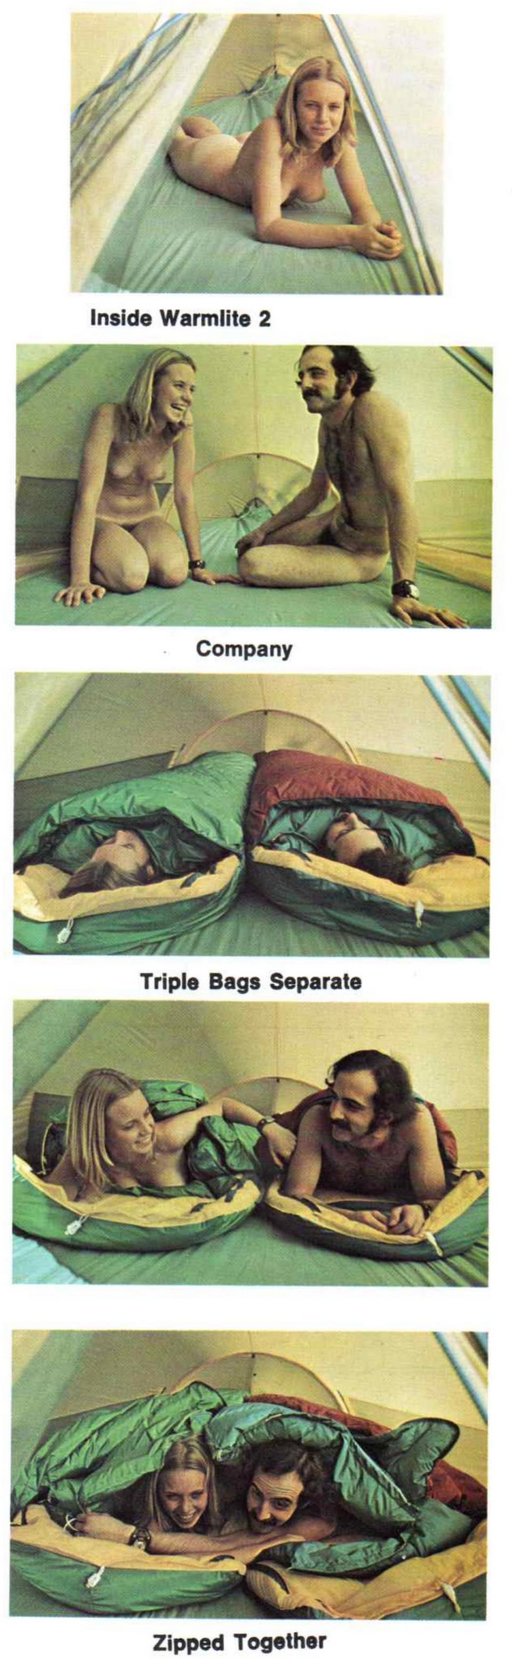 a series of photos showing the potential for two naked people to zip together their sleeping bags